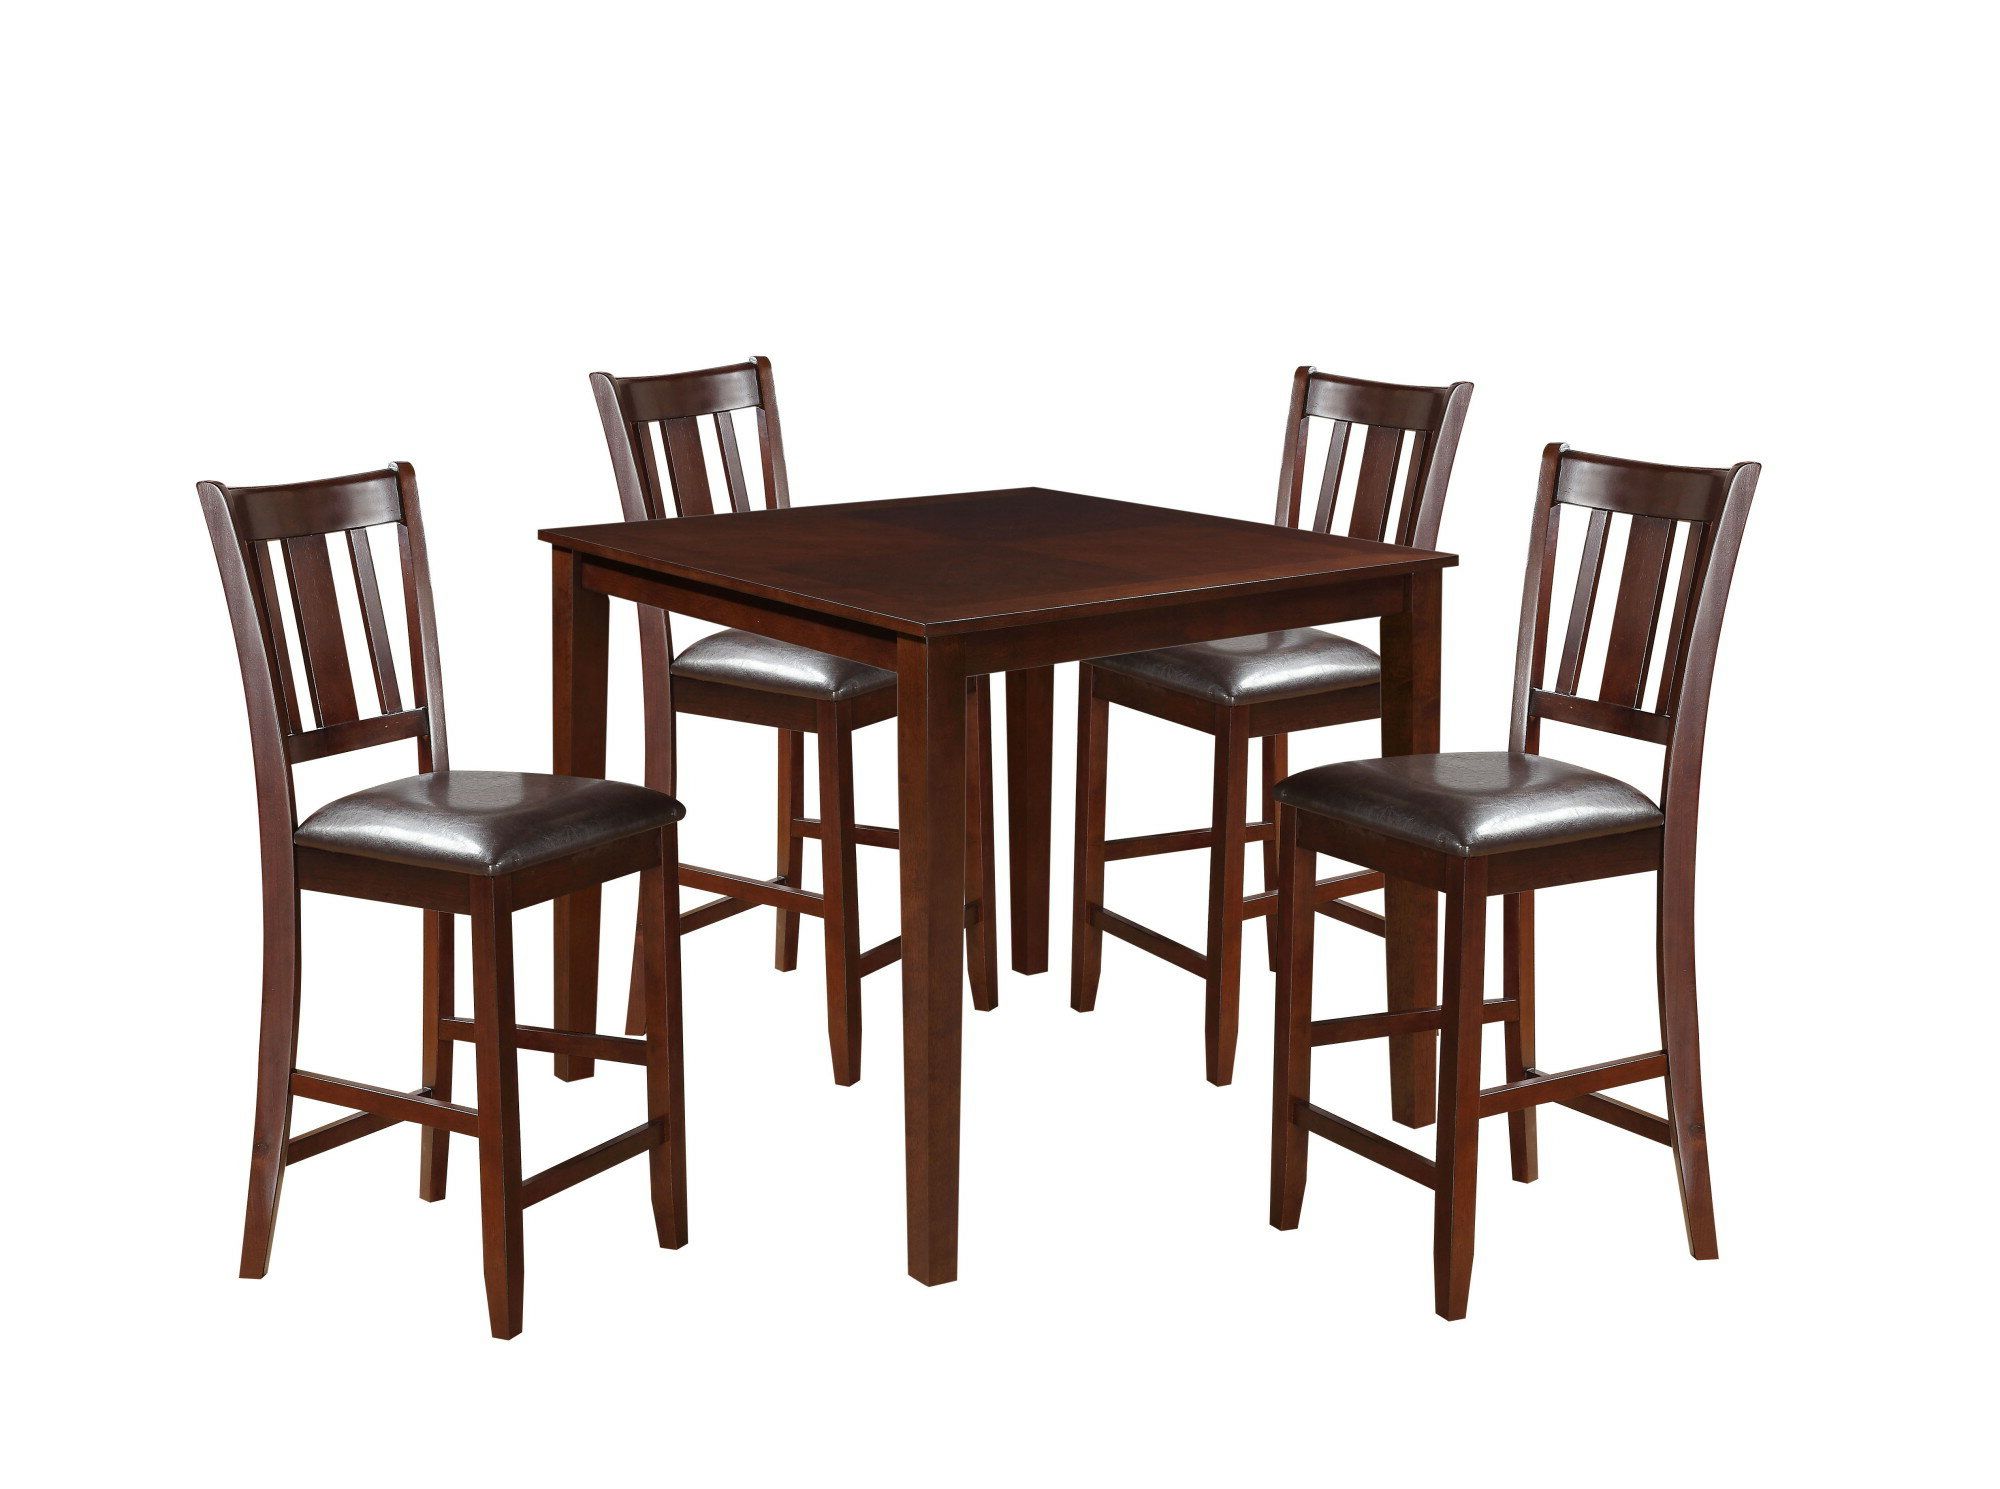 Fashionable Denzel 5 Piece Counter Height Breakfast Nook Dining Sets With Regard To Kroll 5 Piece Counter Height Dining Set (View 9 of 20)